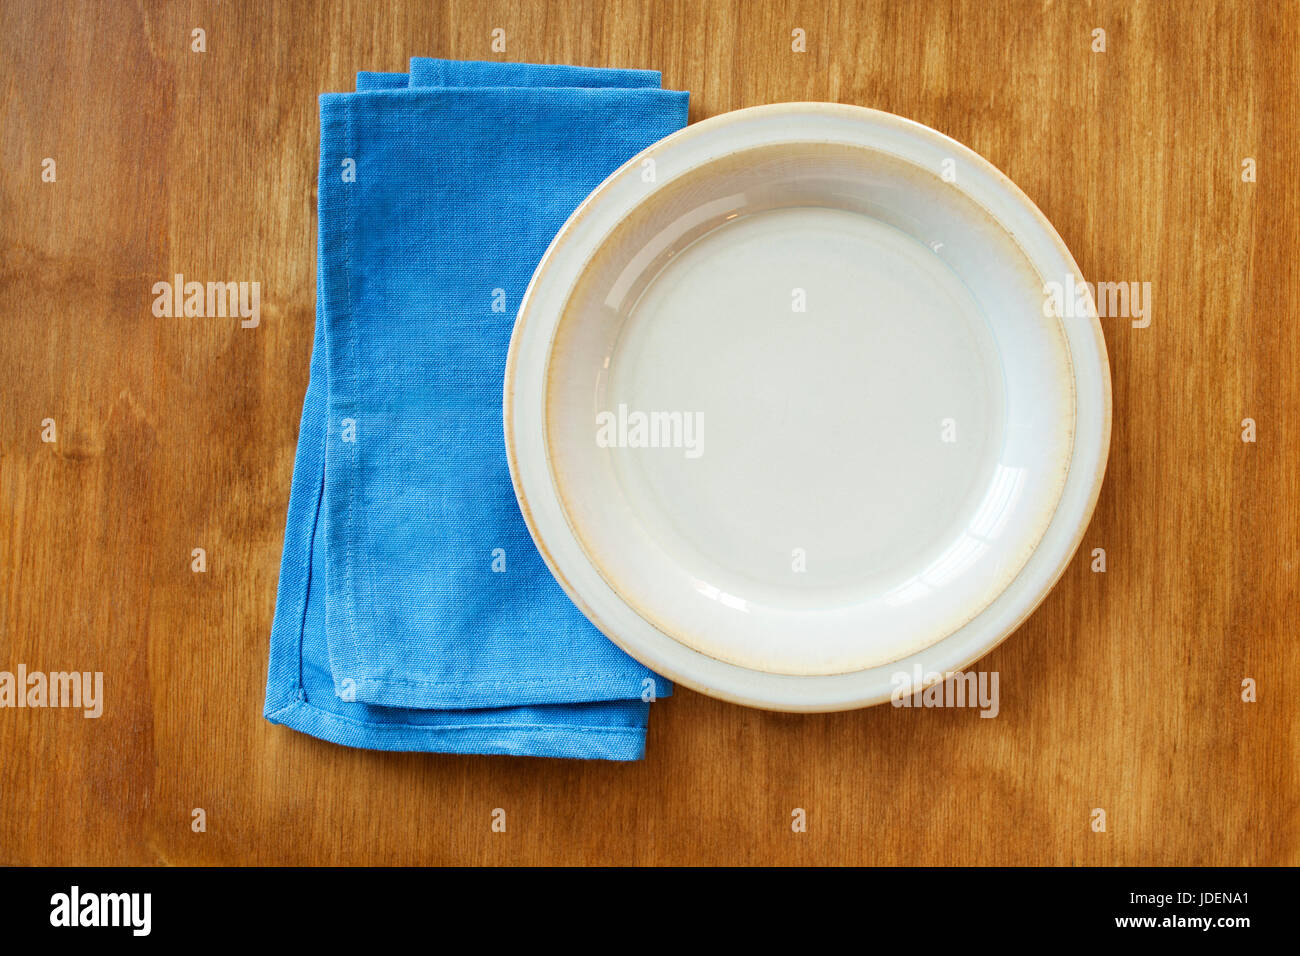 Overhead view of an empty cream colored plate and blue napkin Stock Photo